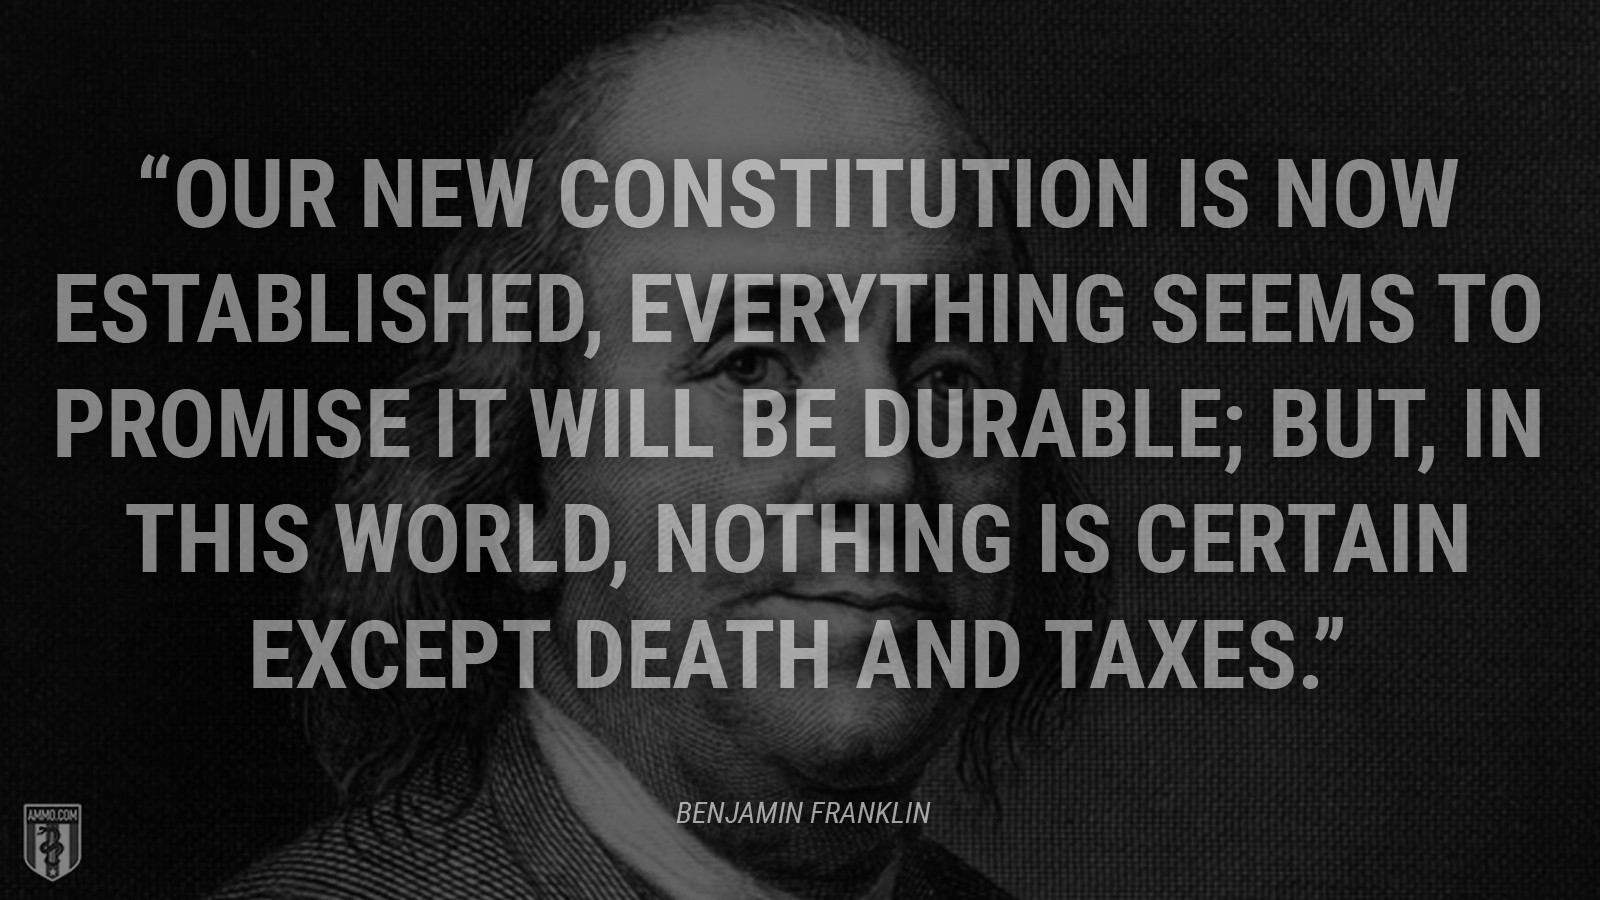 “Our new Constitution is now established, everything seems to promise it will be durable; but, in this world, nothing is certain except death and taxes.” - Benjamin Franklin